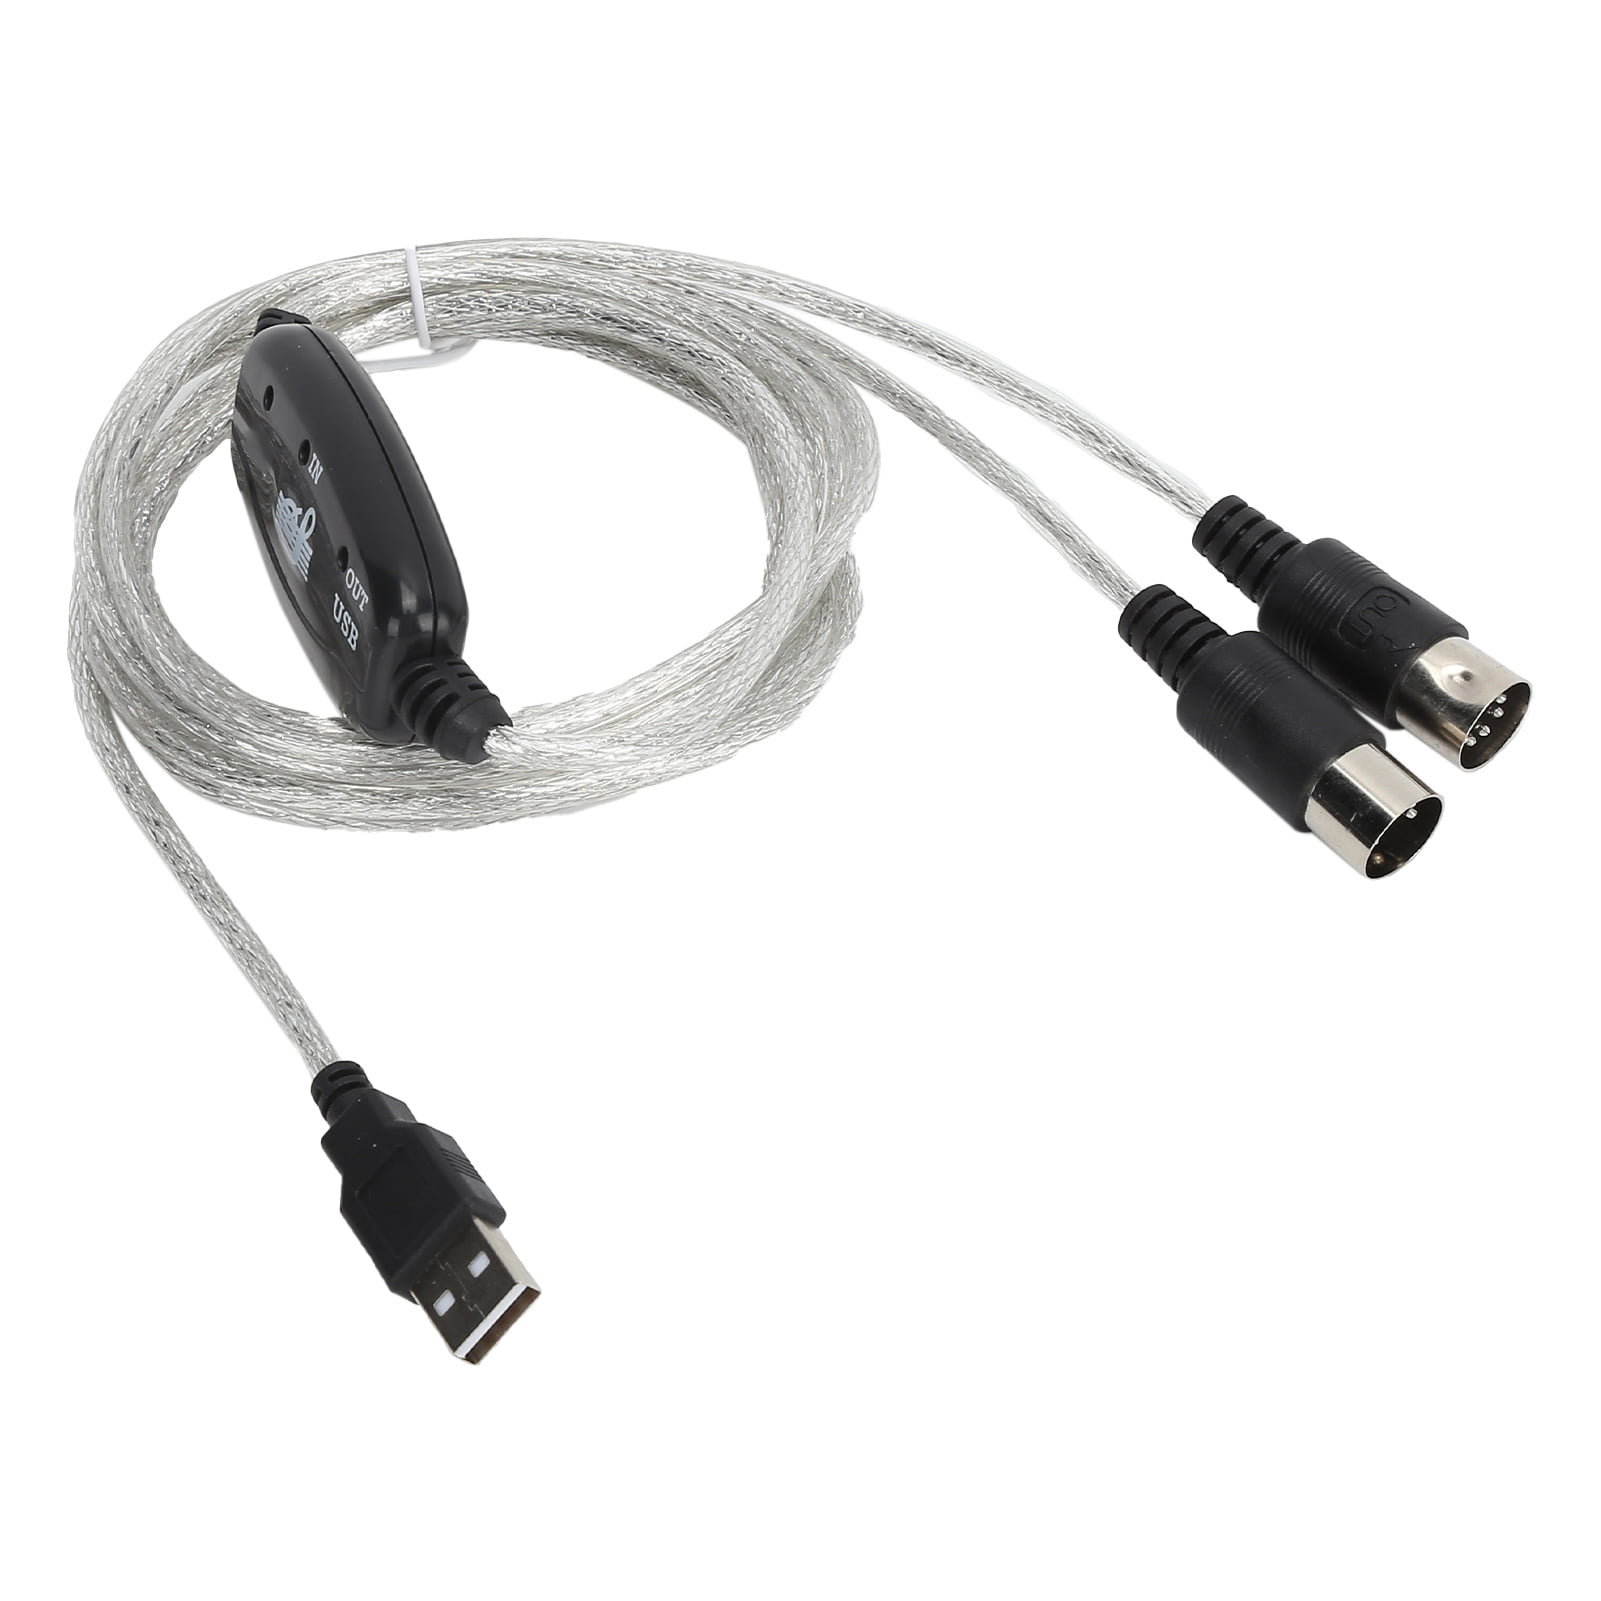 Midi To USB In Driver MIDI Cable Connect Electronic Musical Instruments - Walmart.com